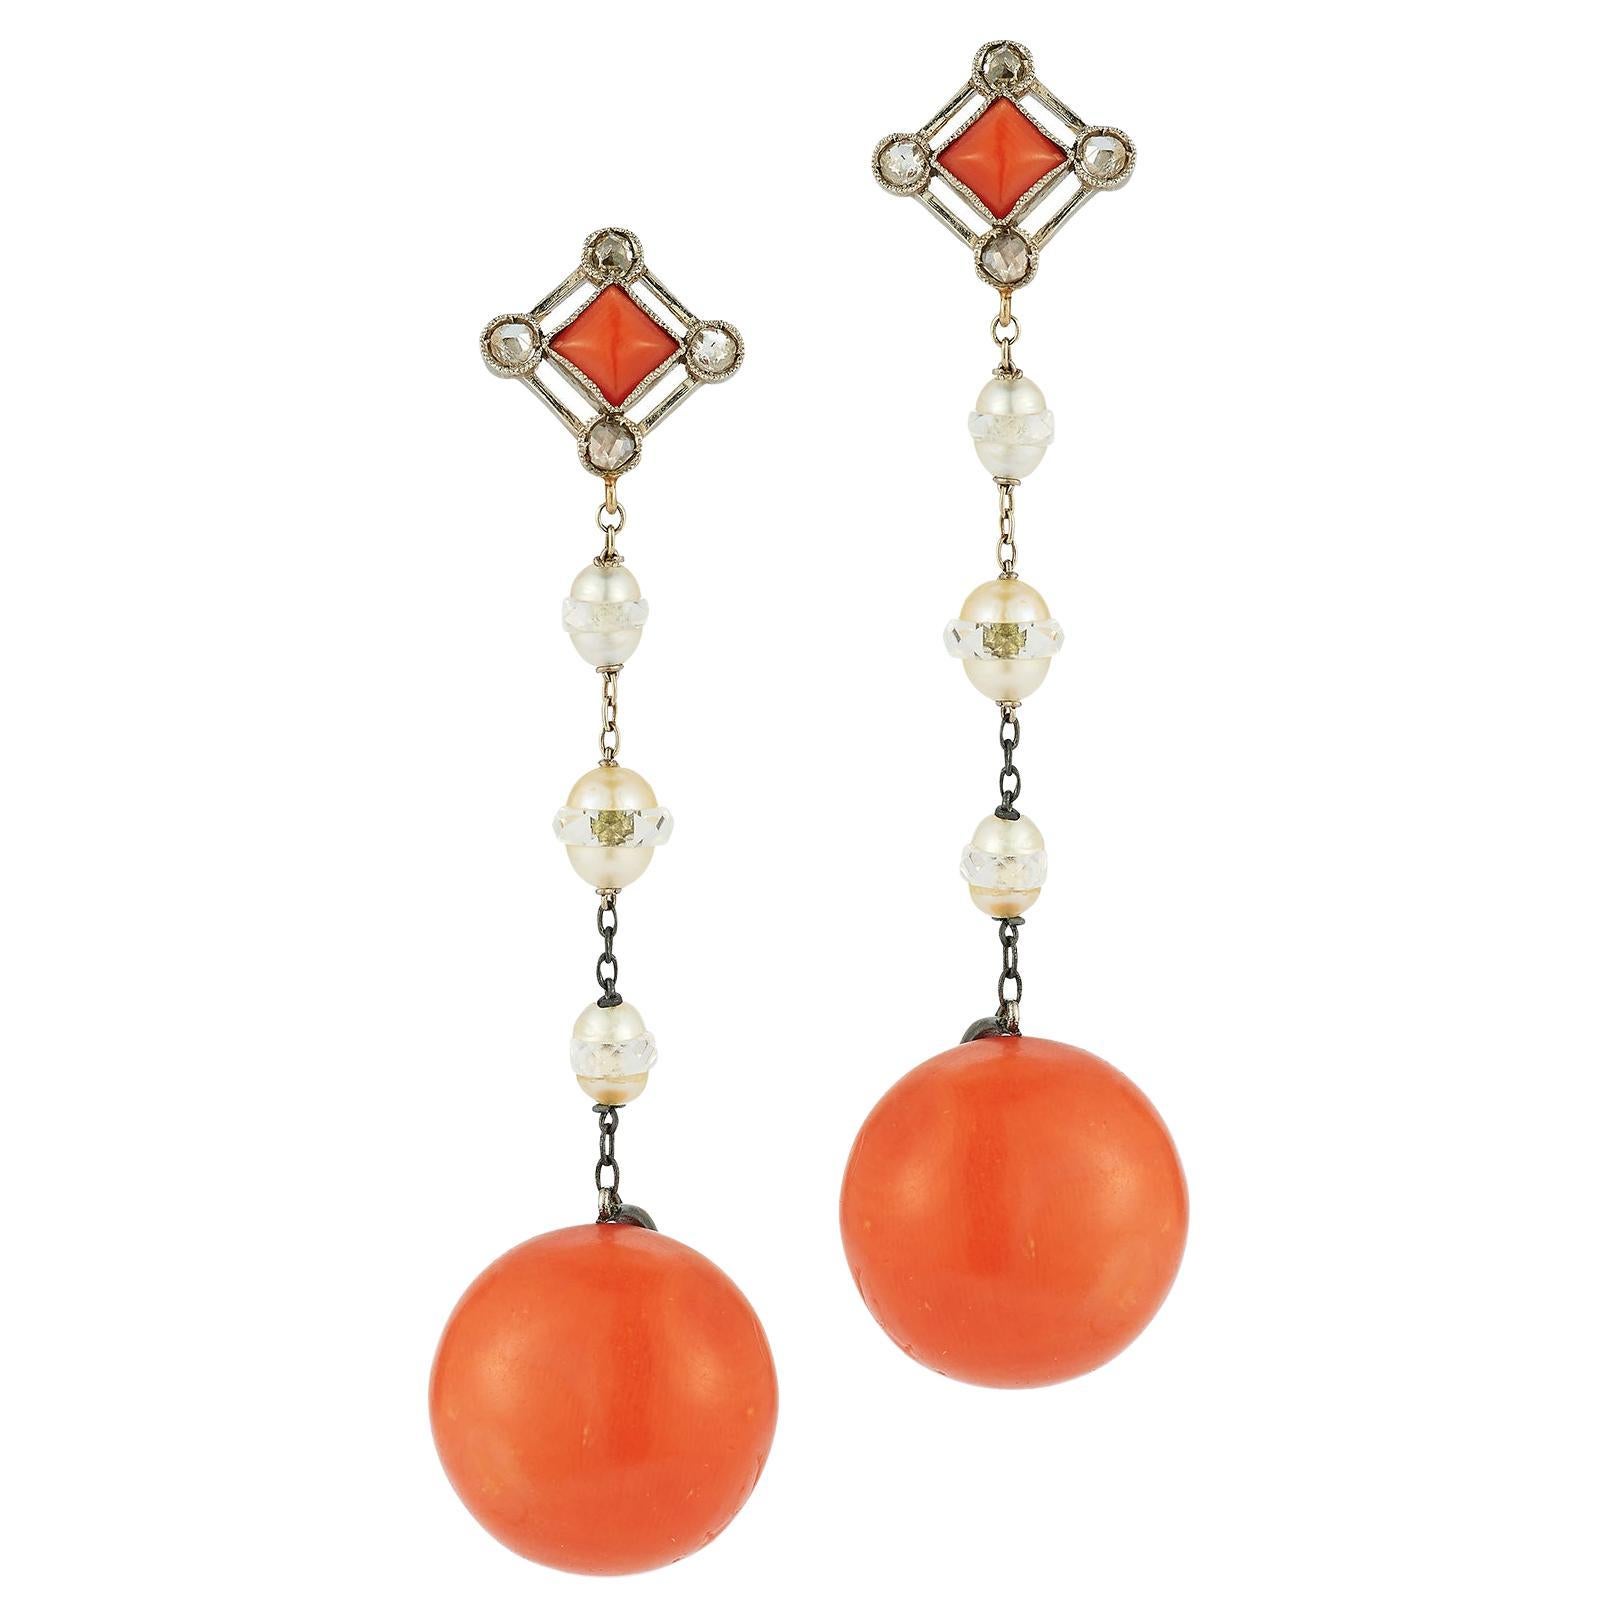 Antique Coral & Pearl Earrings - sold to elmwoods